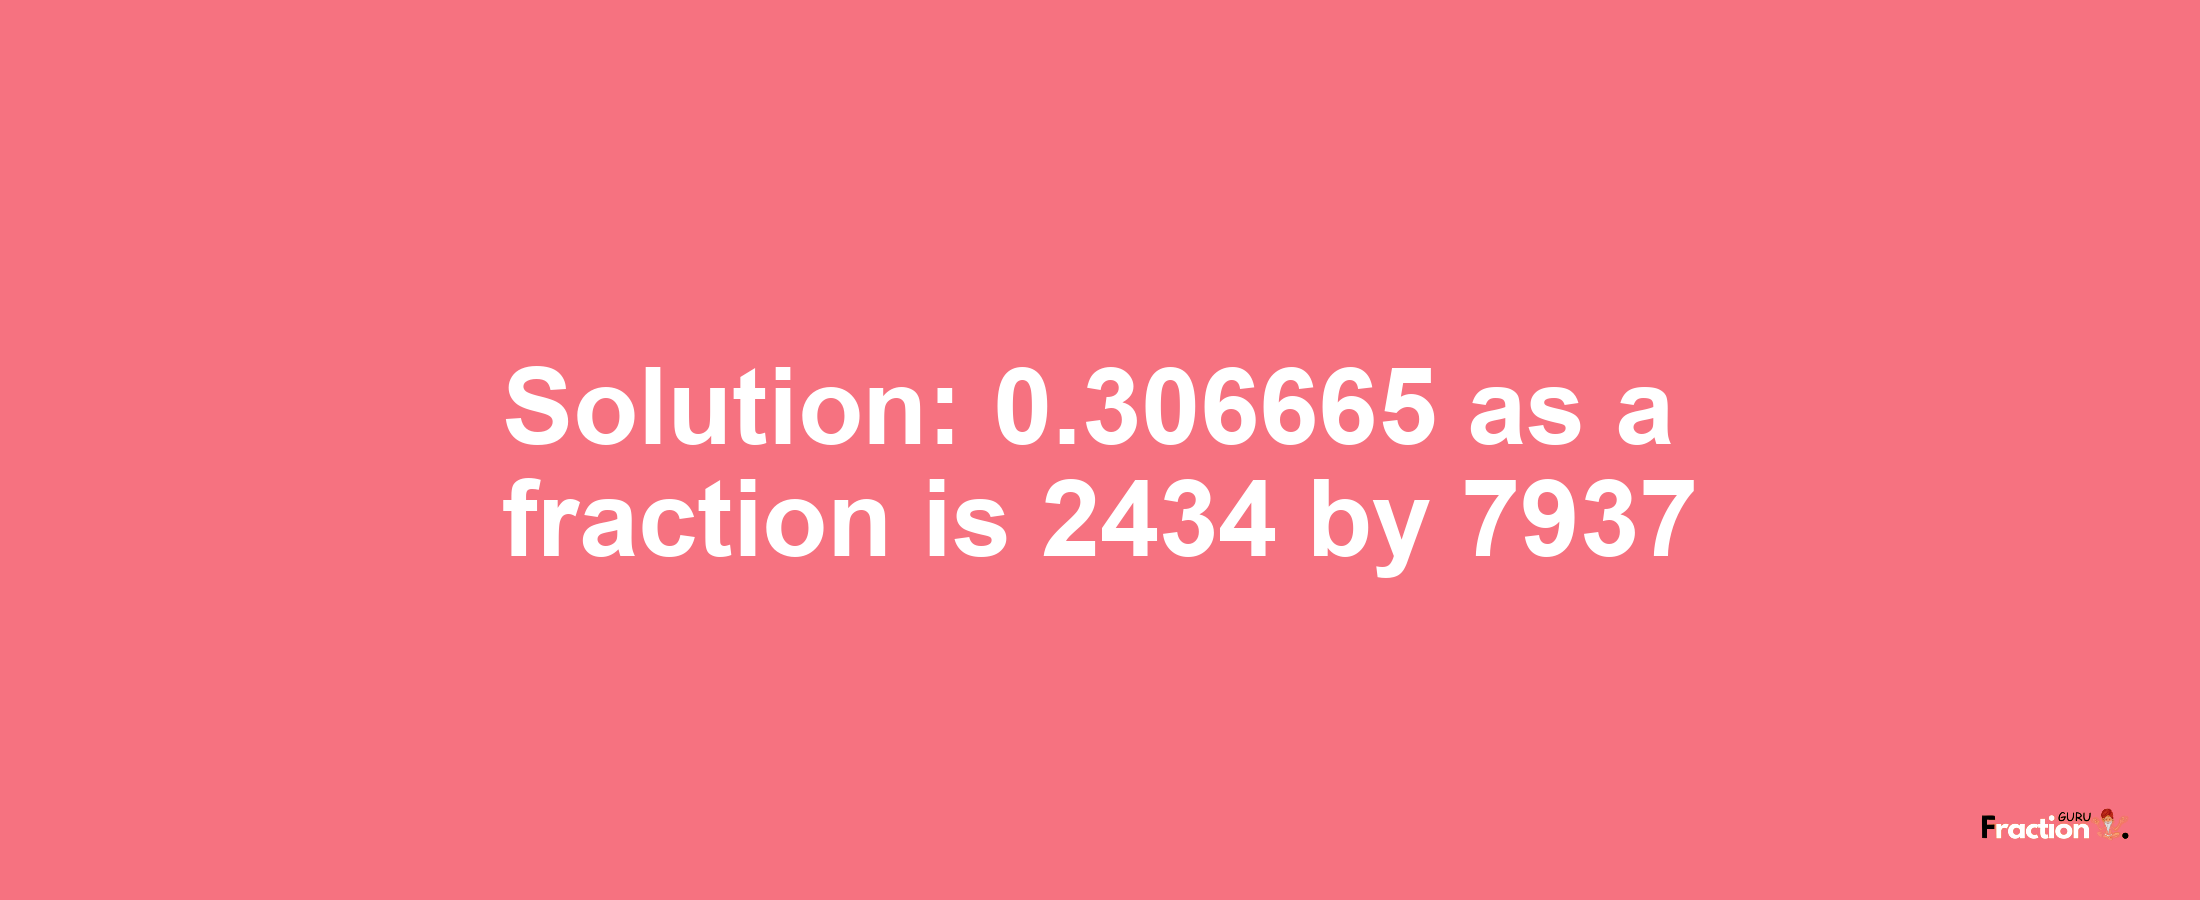 Solution:0.306665 as a fraction is 2434/7937